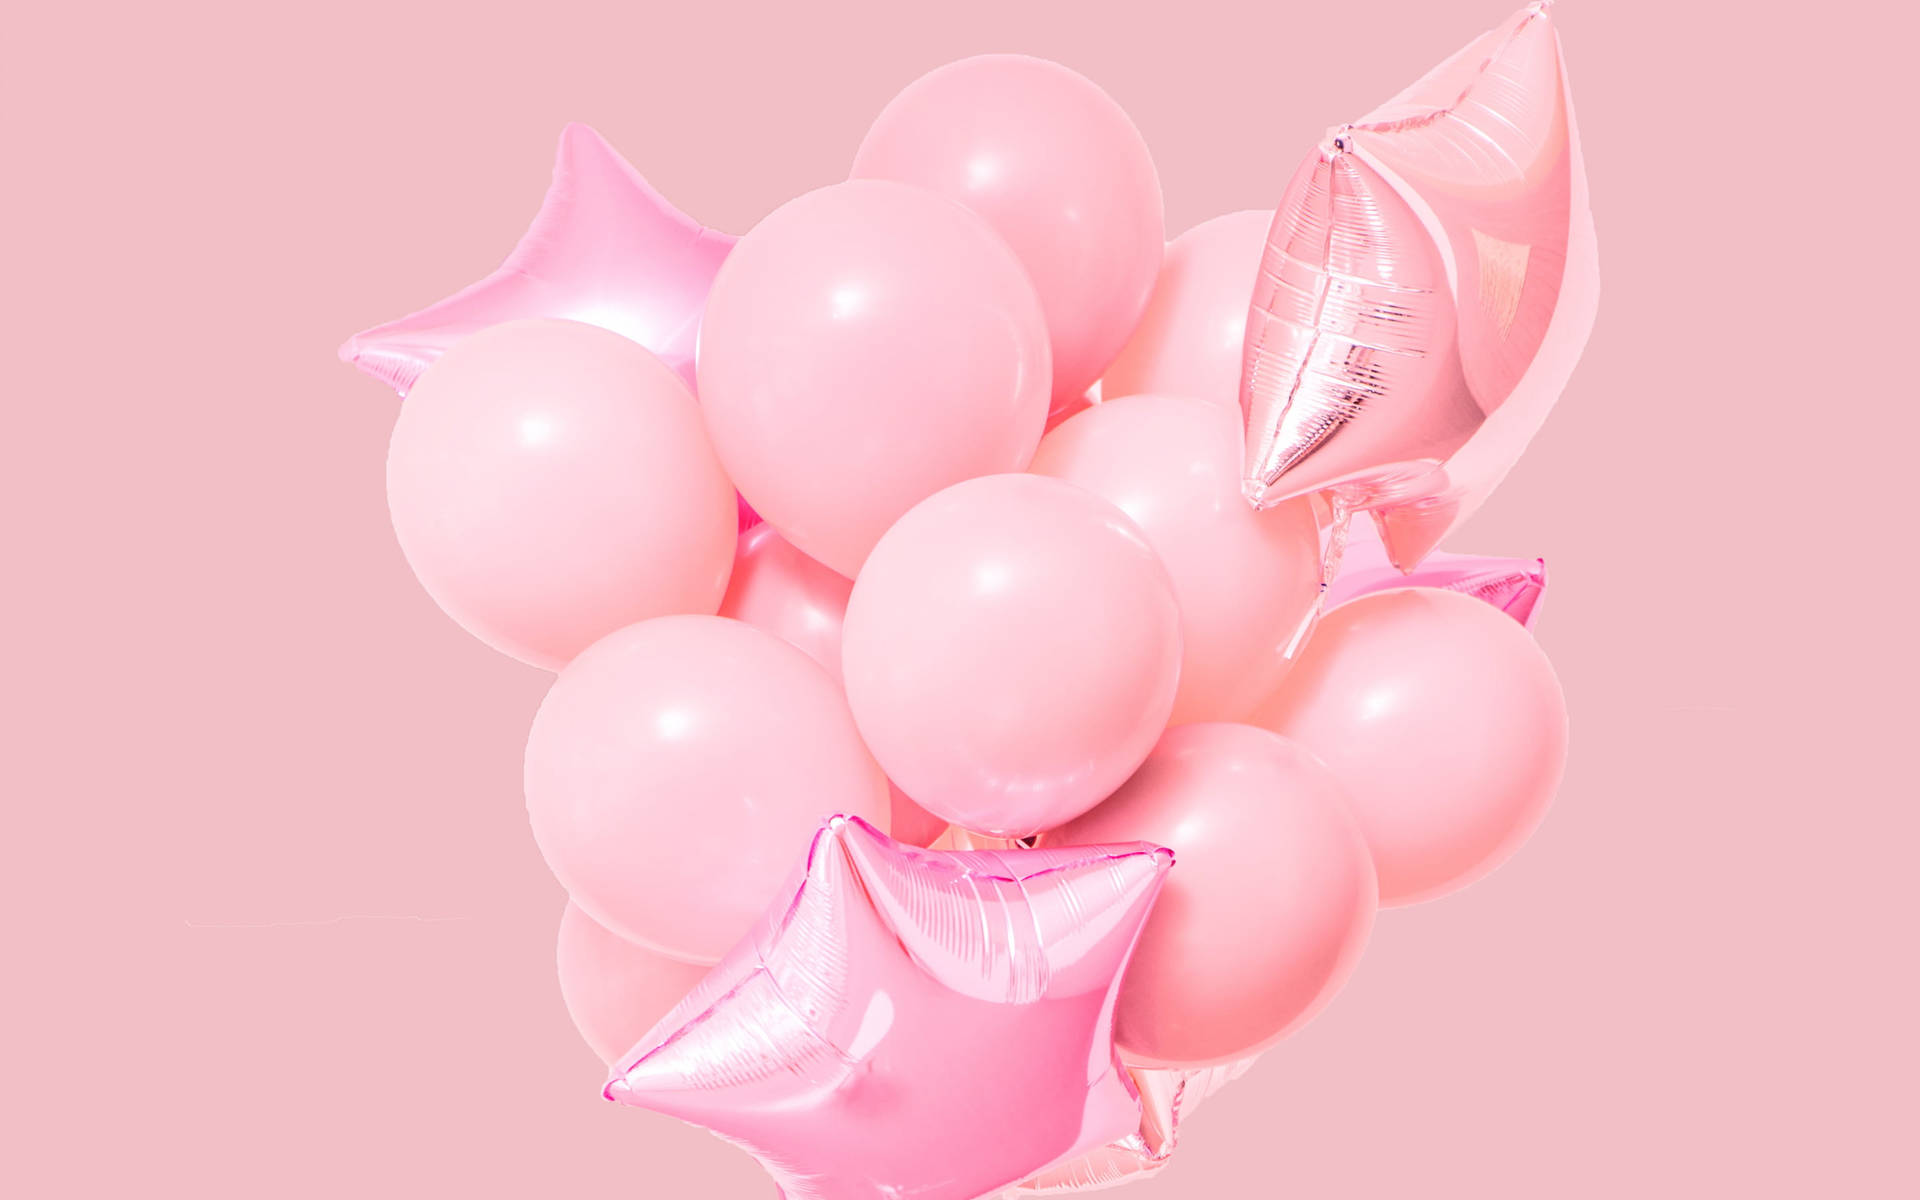 Balloons On Pink Background Wallpaper